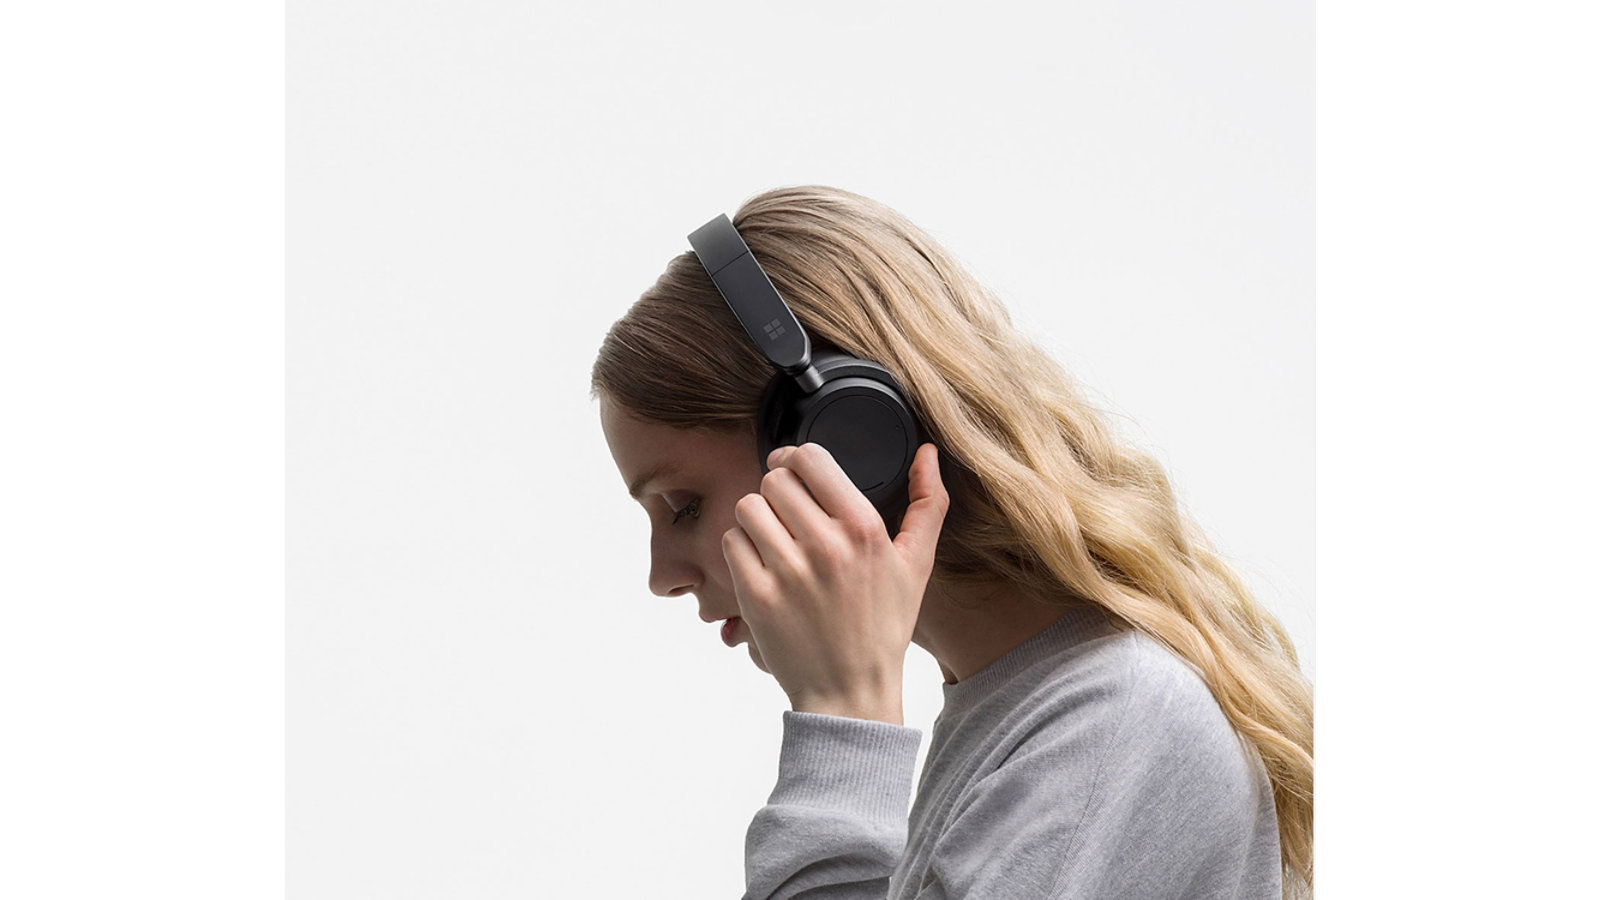 A person is shown wearing Surface Headphones 2